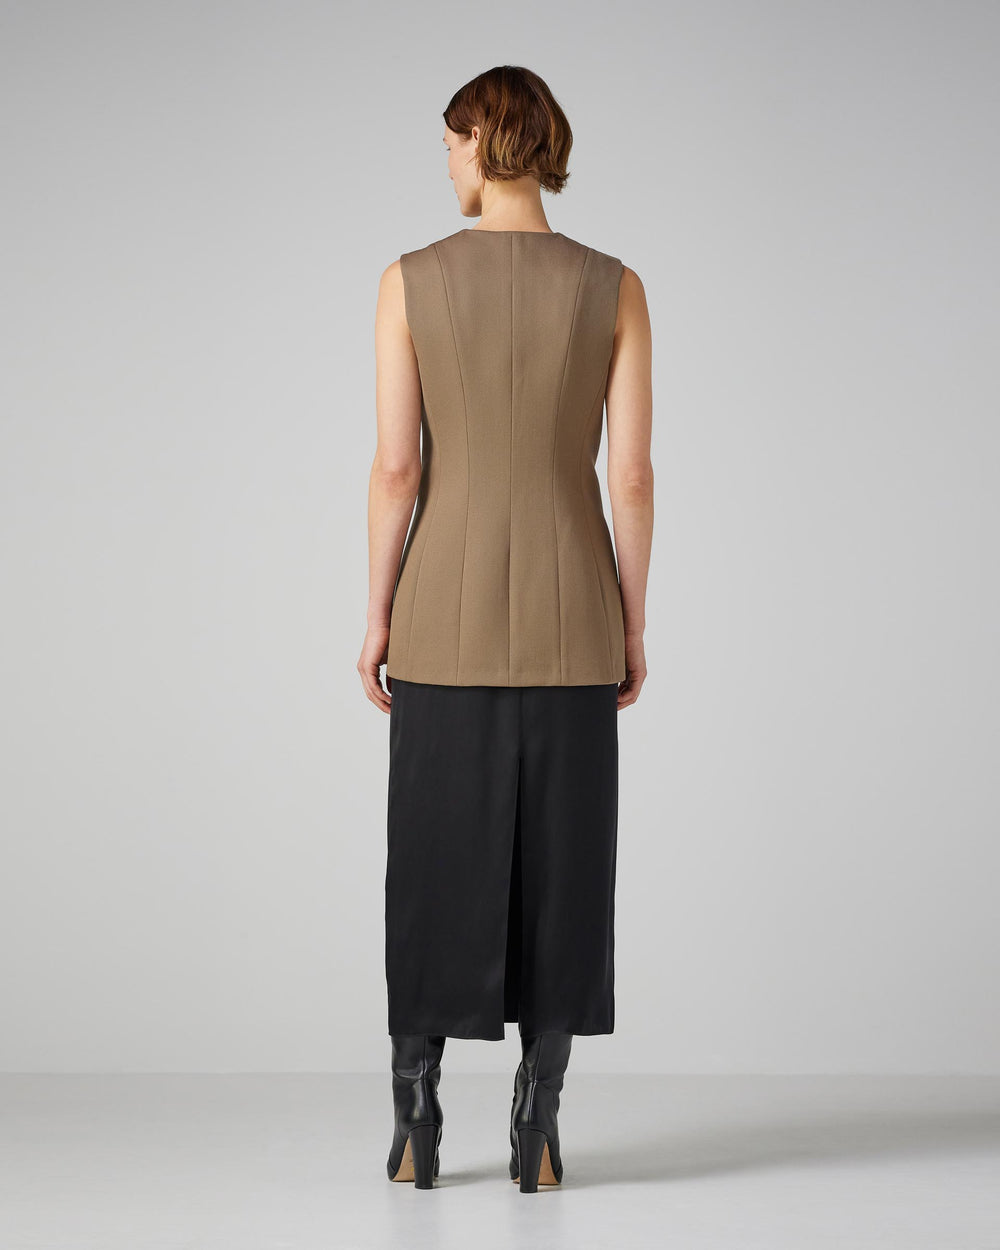 Gia Vest With SEP in Wool Twill, Mocha